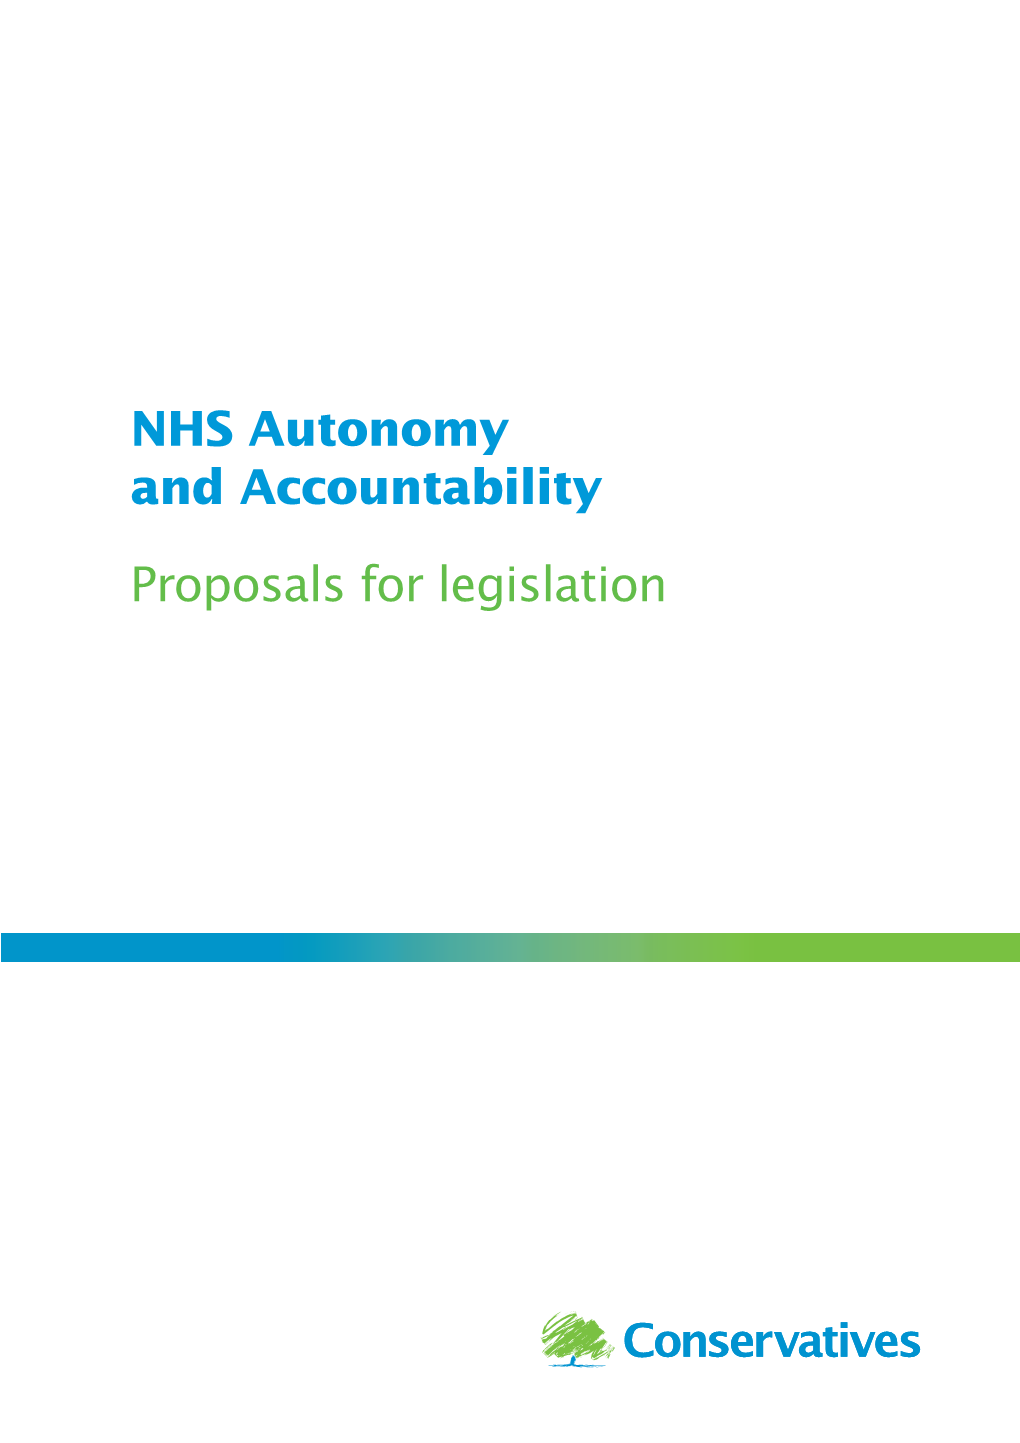 NHS Autonomy and Accountability Proposals for Legislation